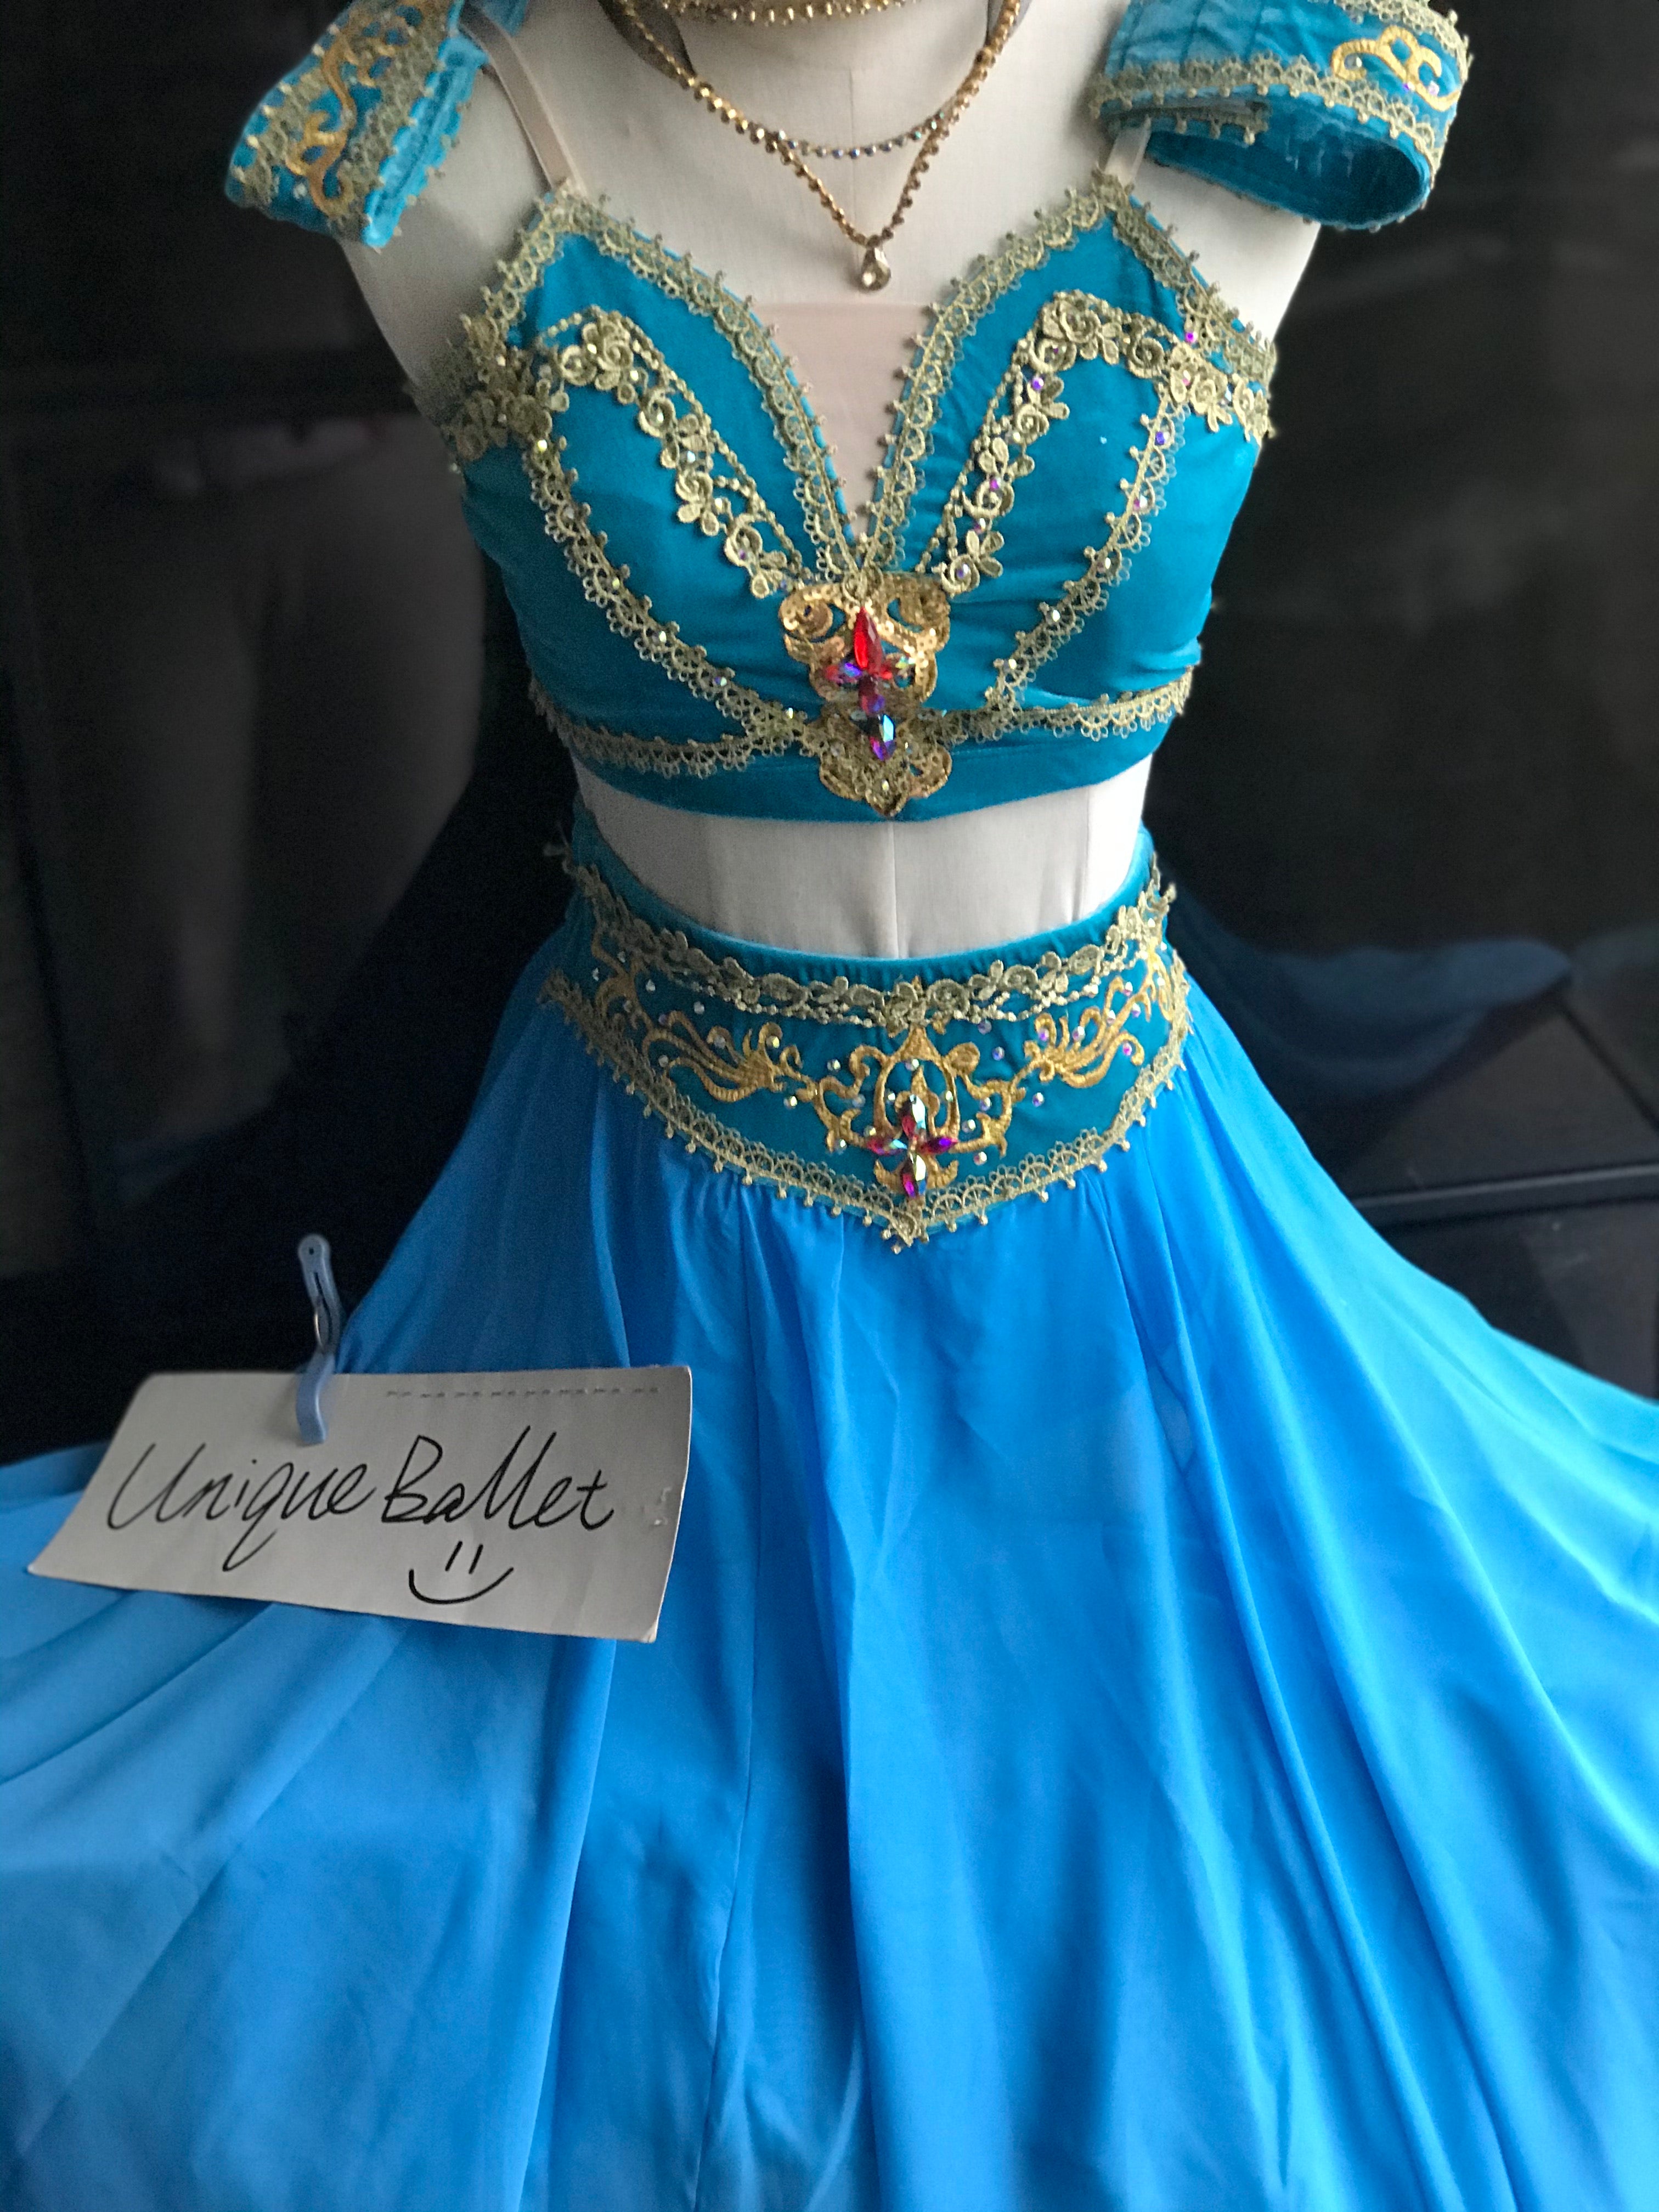 Blue 2 Pieces Pullover Greek Le Corsaire Long Dress Lyrical Ballet Performance Stage Costume（Not Include the headpiece)-YL-LR2PICSKRTBLU